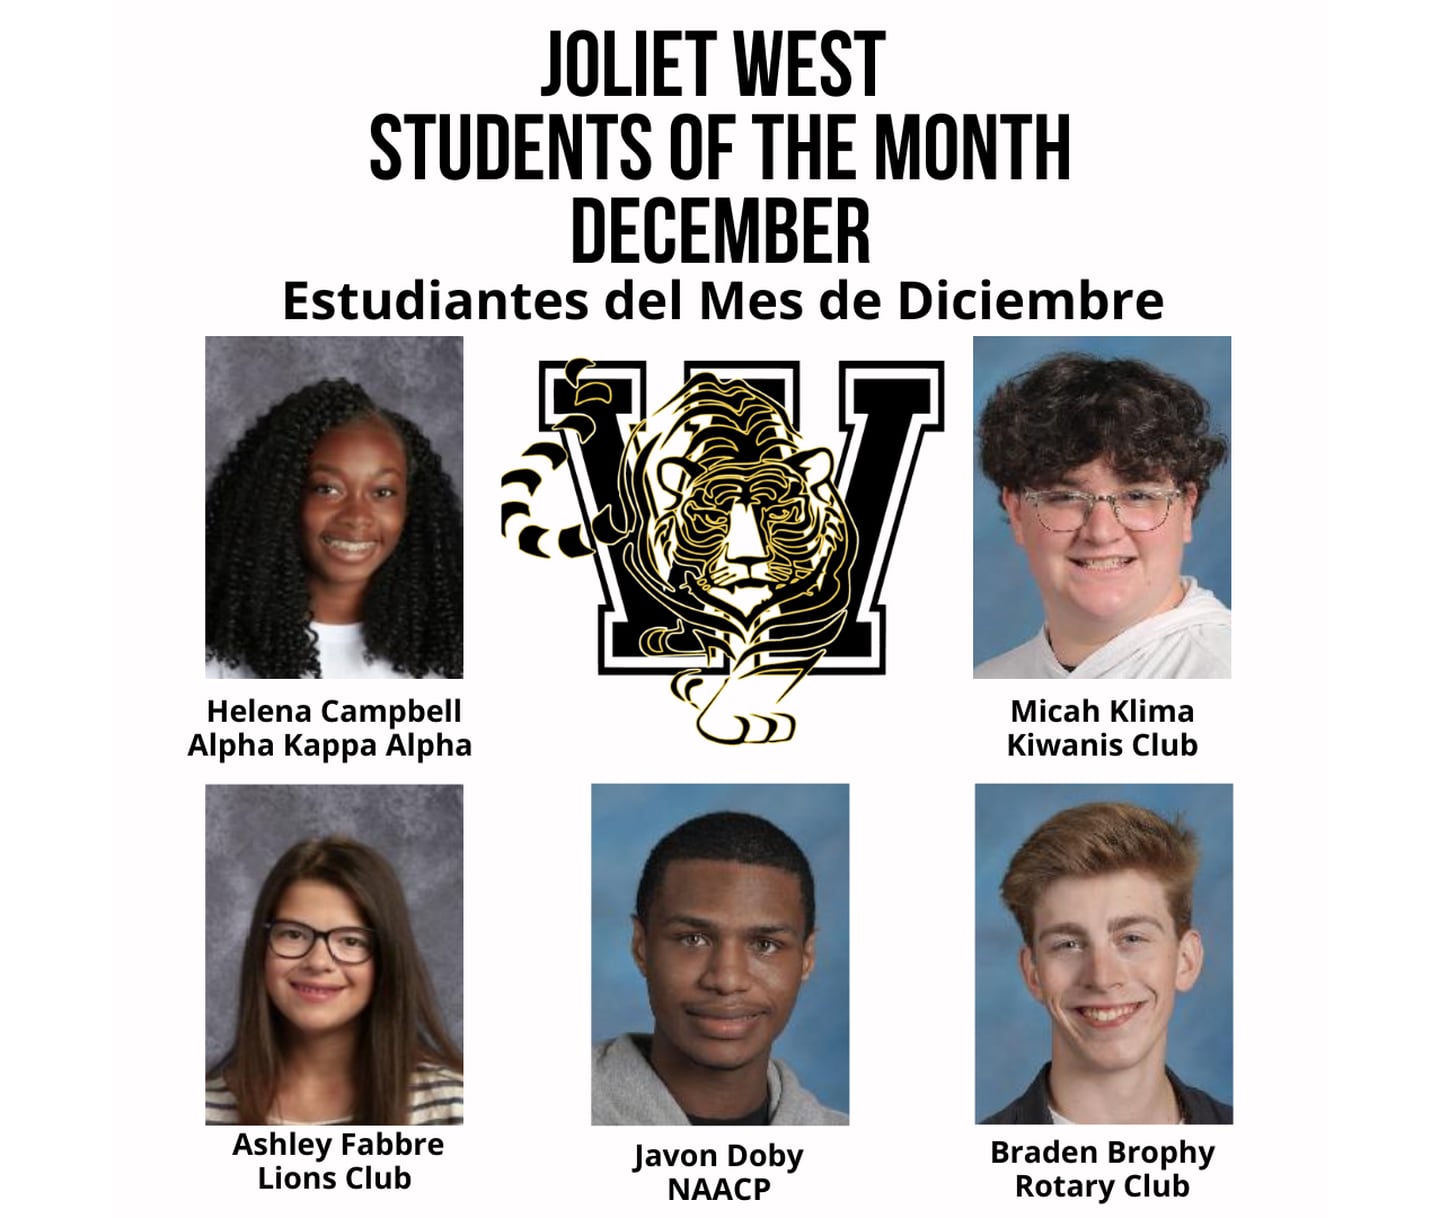 The Joliet West High School Students of the Month for December are Micah Klima, Kiwanis; Ashley Fabbre, Lions; Braden Brophy, Rotary; Javon Doby, NAACP; and Helena Campbell, Alpha Kappa Alpha.